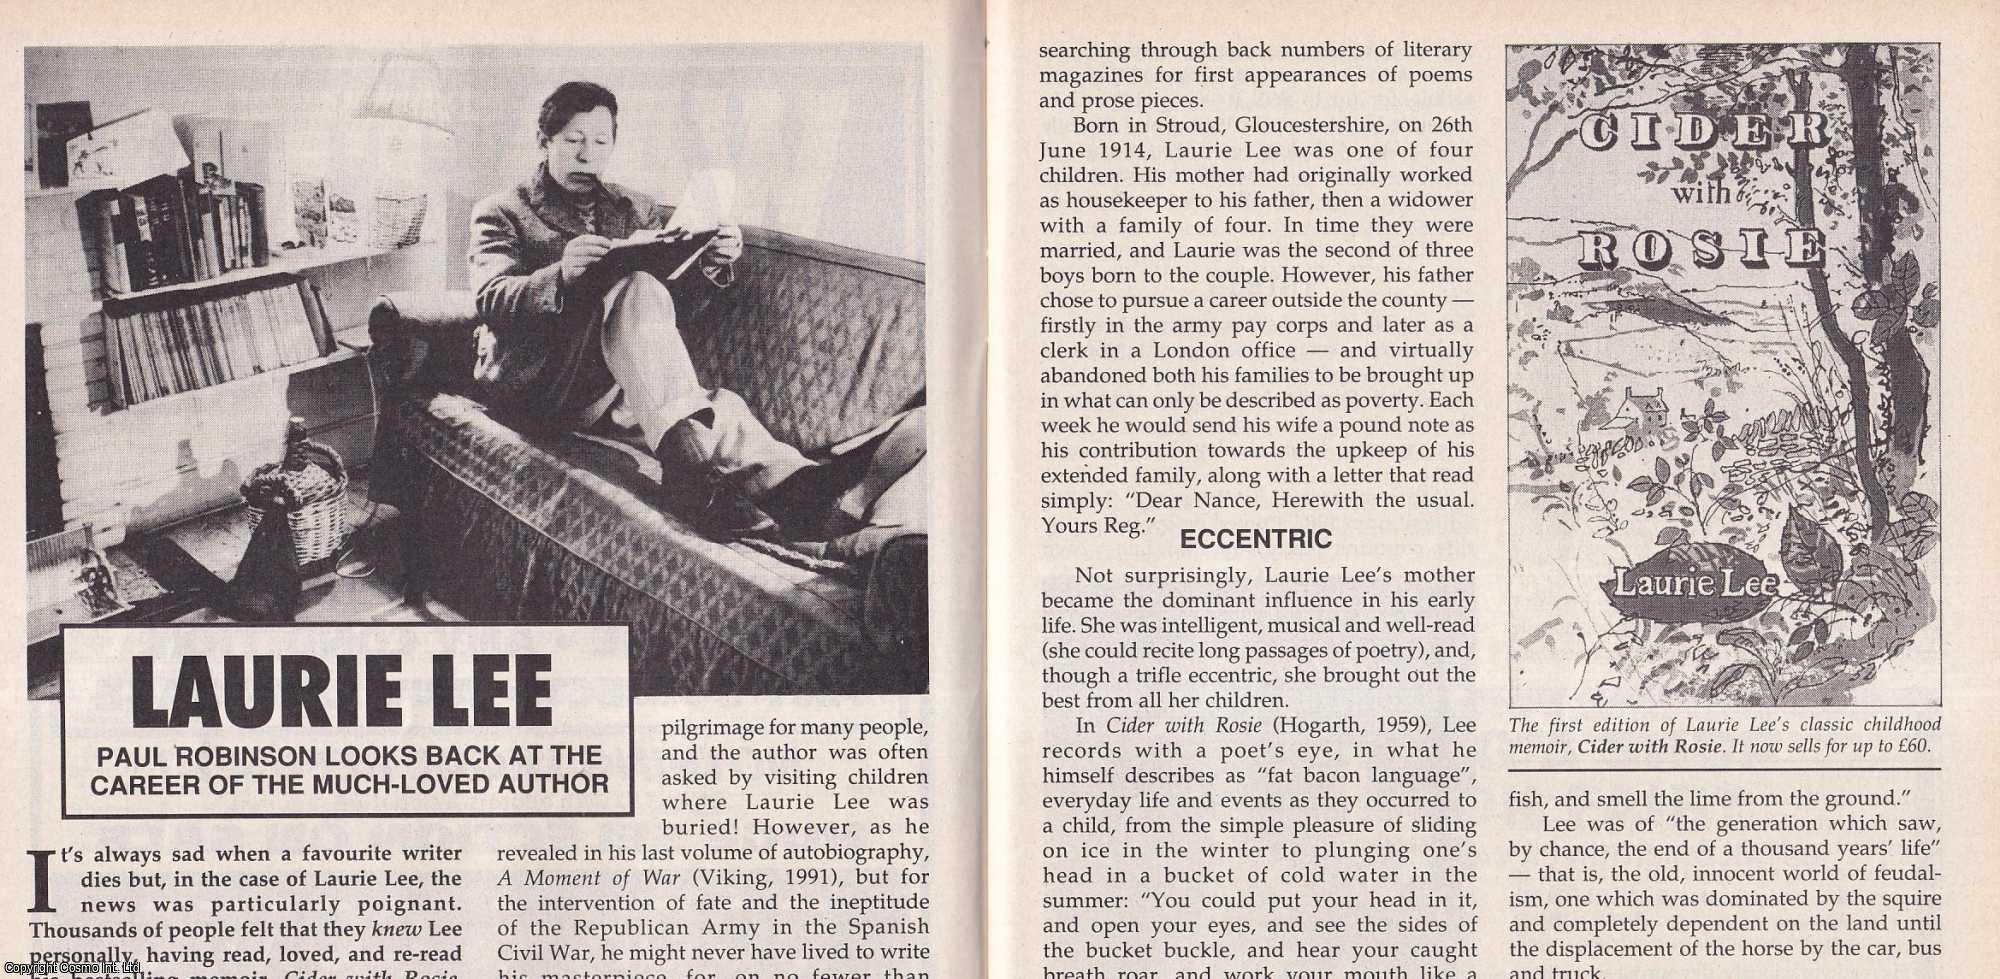 Paul Robinson - Laurie Lee. Looking Back at The Career of The Much Loved Author. This is an original article separated from an issue of The Book & Magazine Collector publication, 1997.